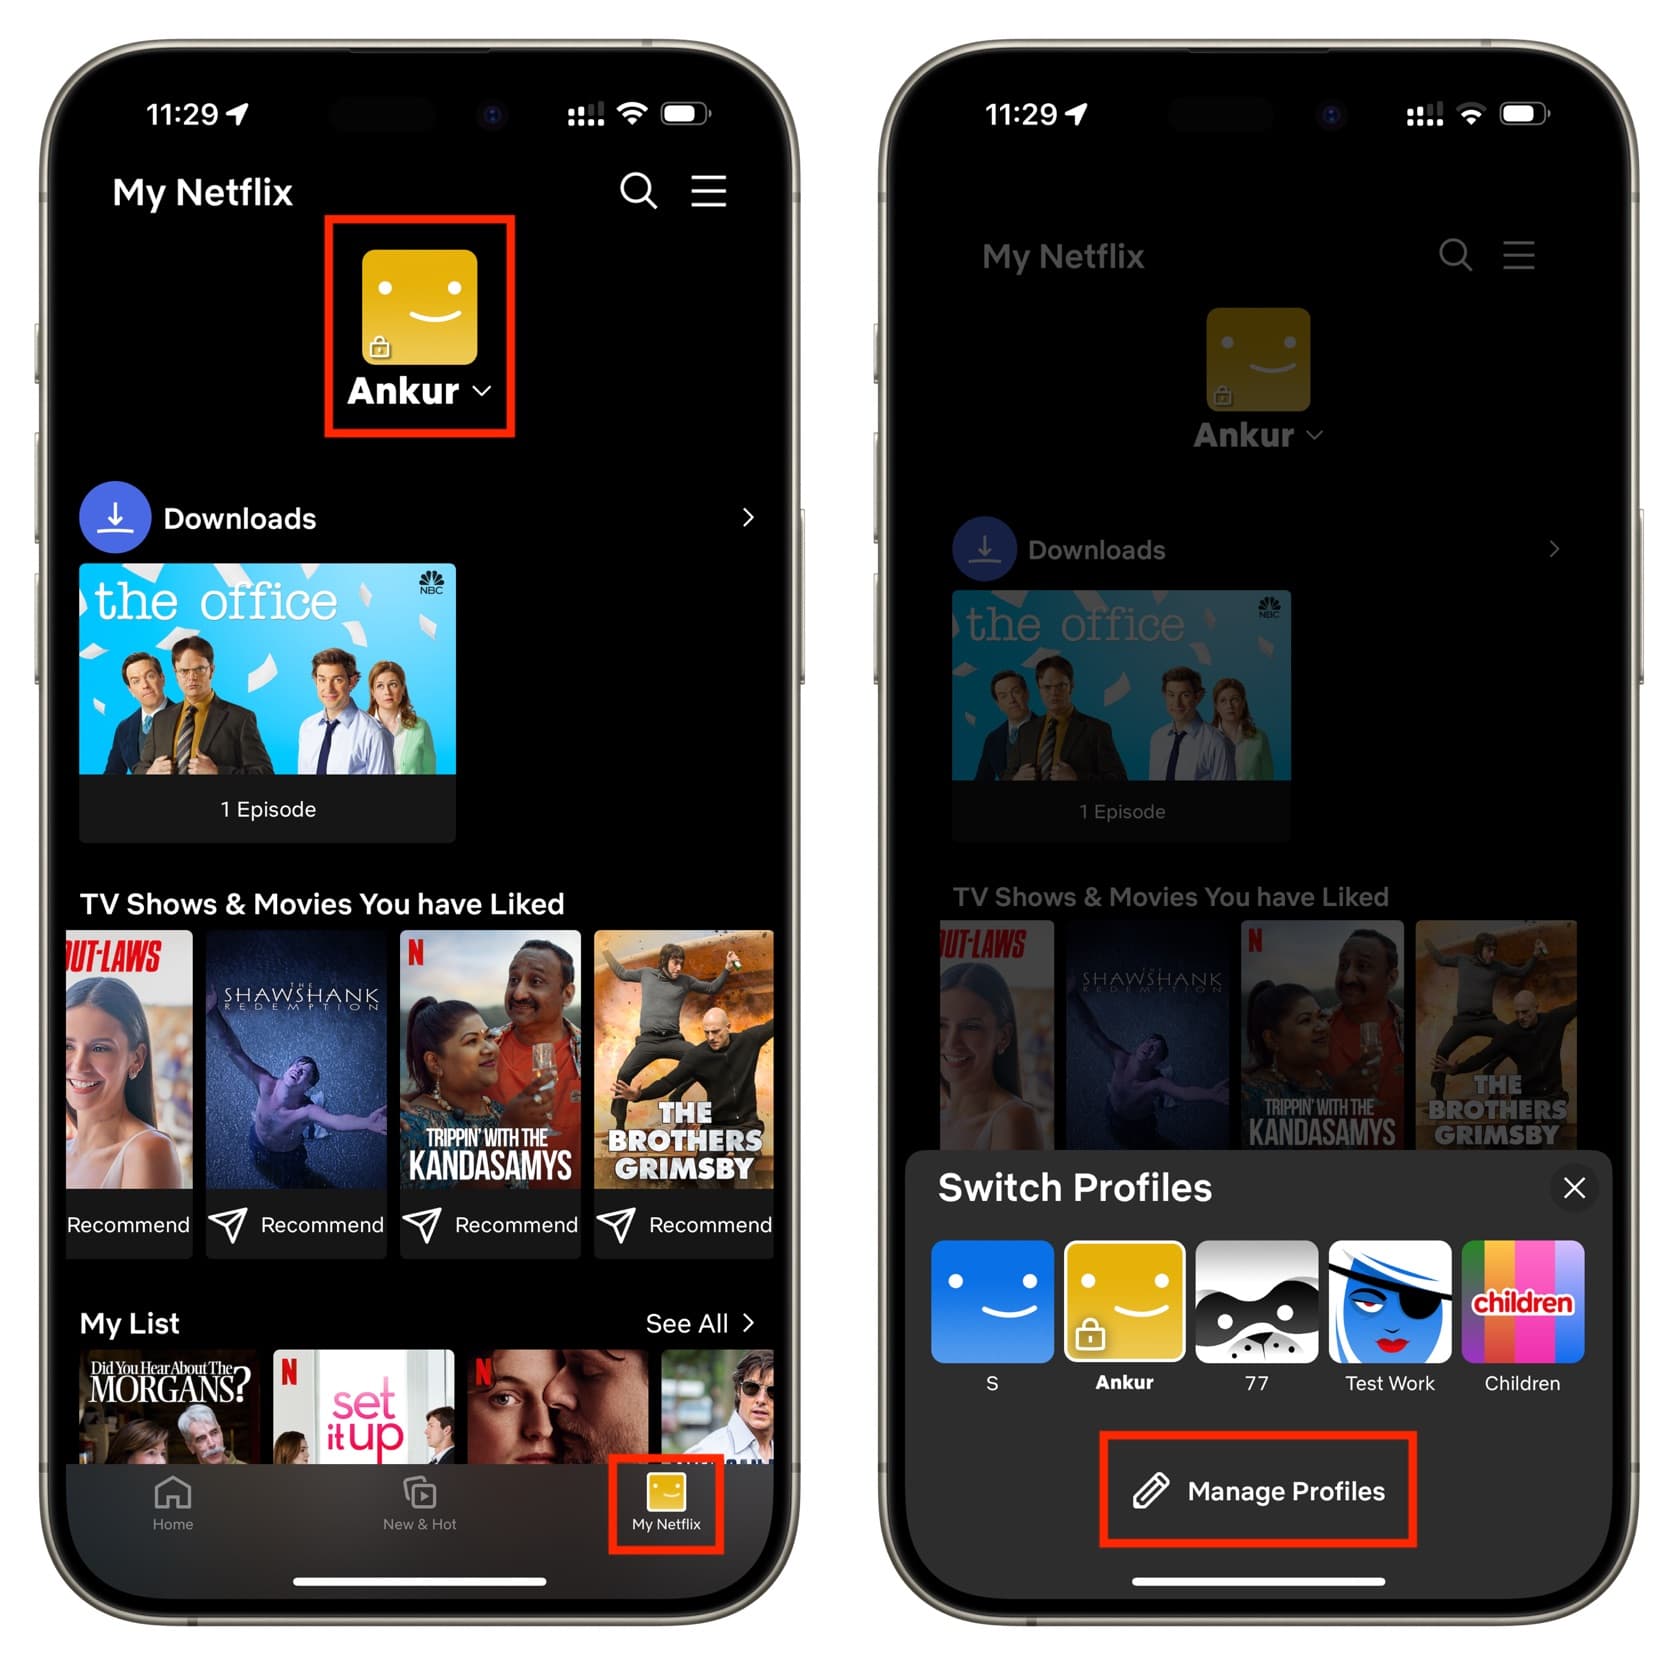 Tap your name and choose Manage Profiles in Netflix on iPhone